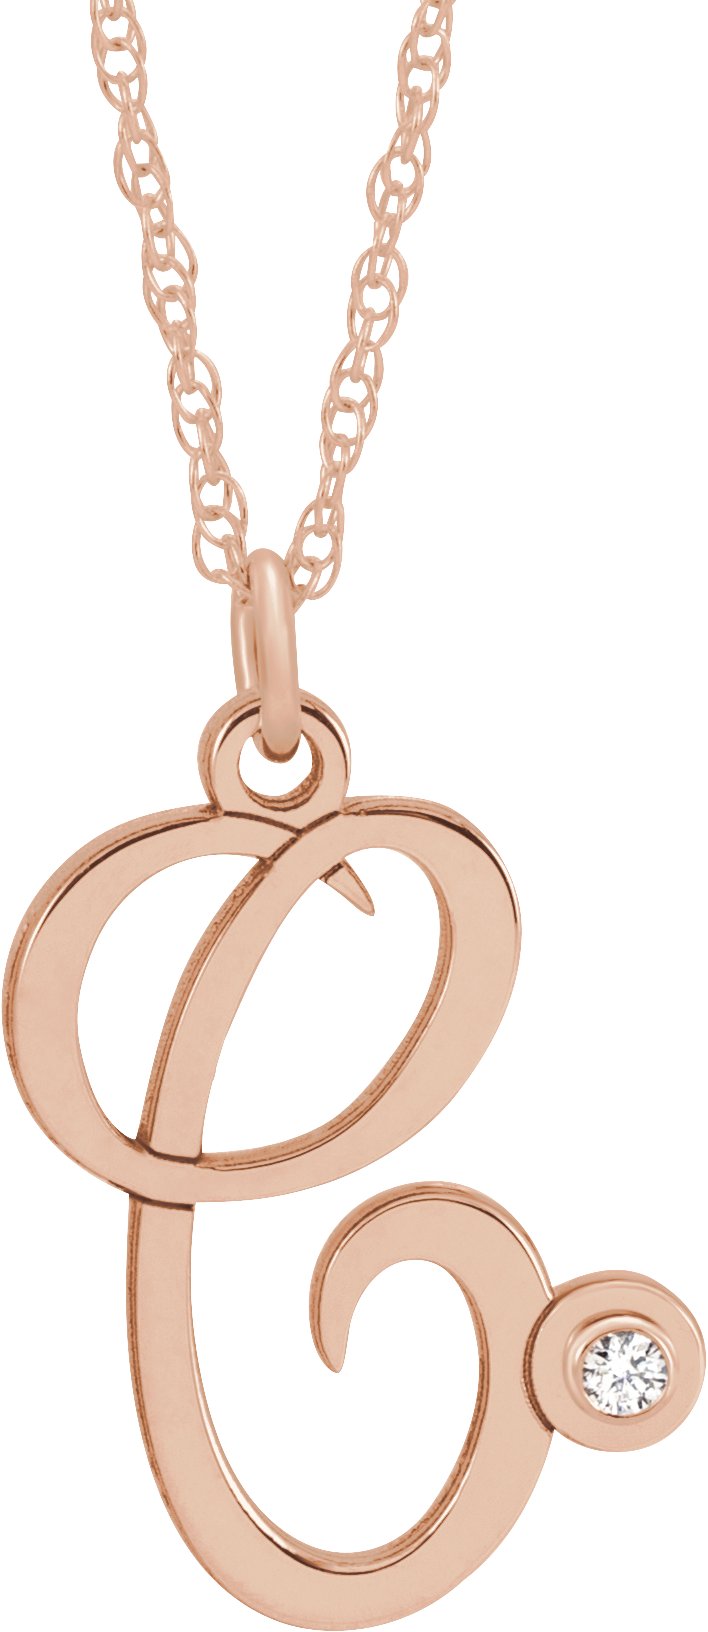 14K Rose Gold-Plated Sterling Silver .02 CT Diamond Script Initial C 16-18" Necklace